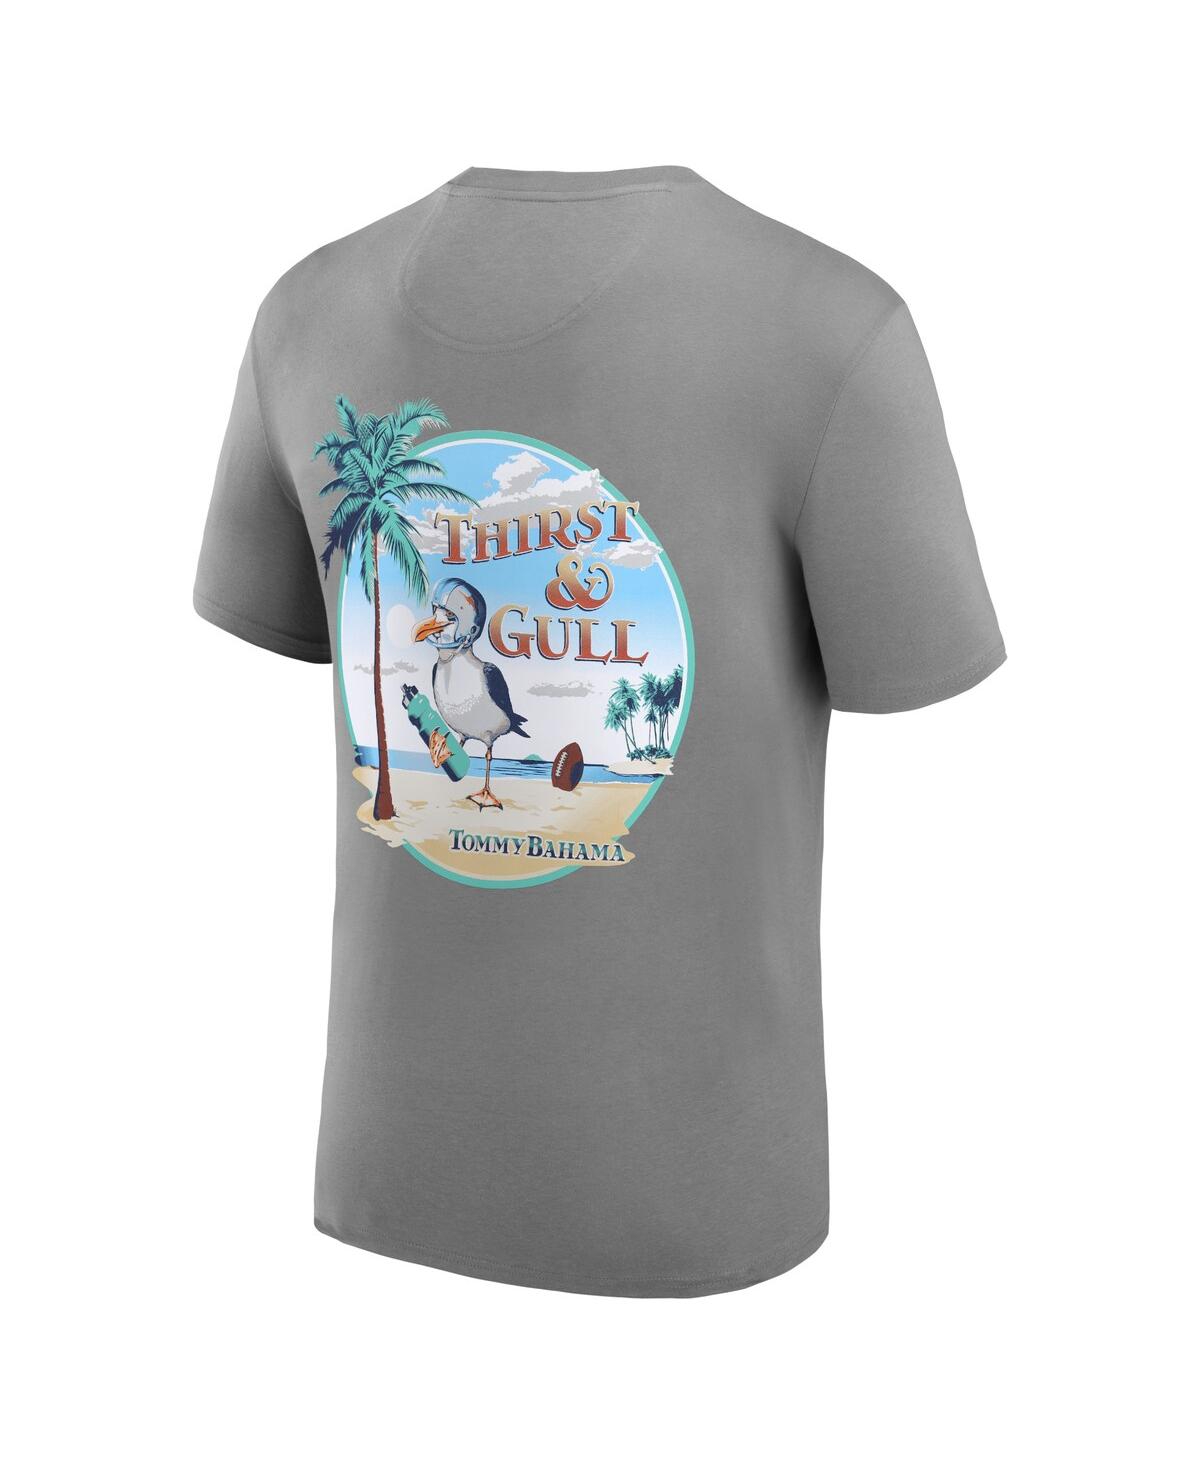 Shop Tommy Bahama Men's  Gray Ohio State Buckeyes Thirst And Gull T-shirt